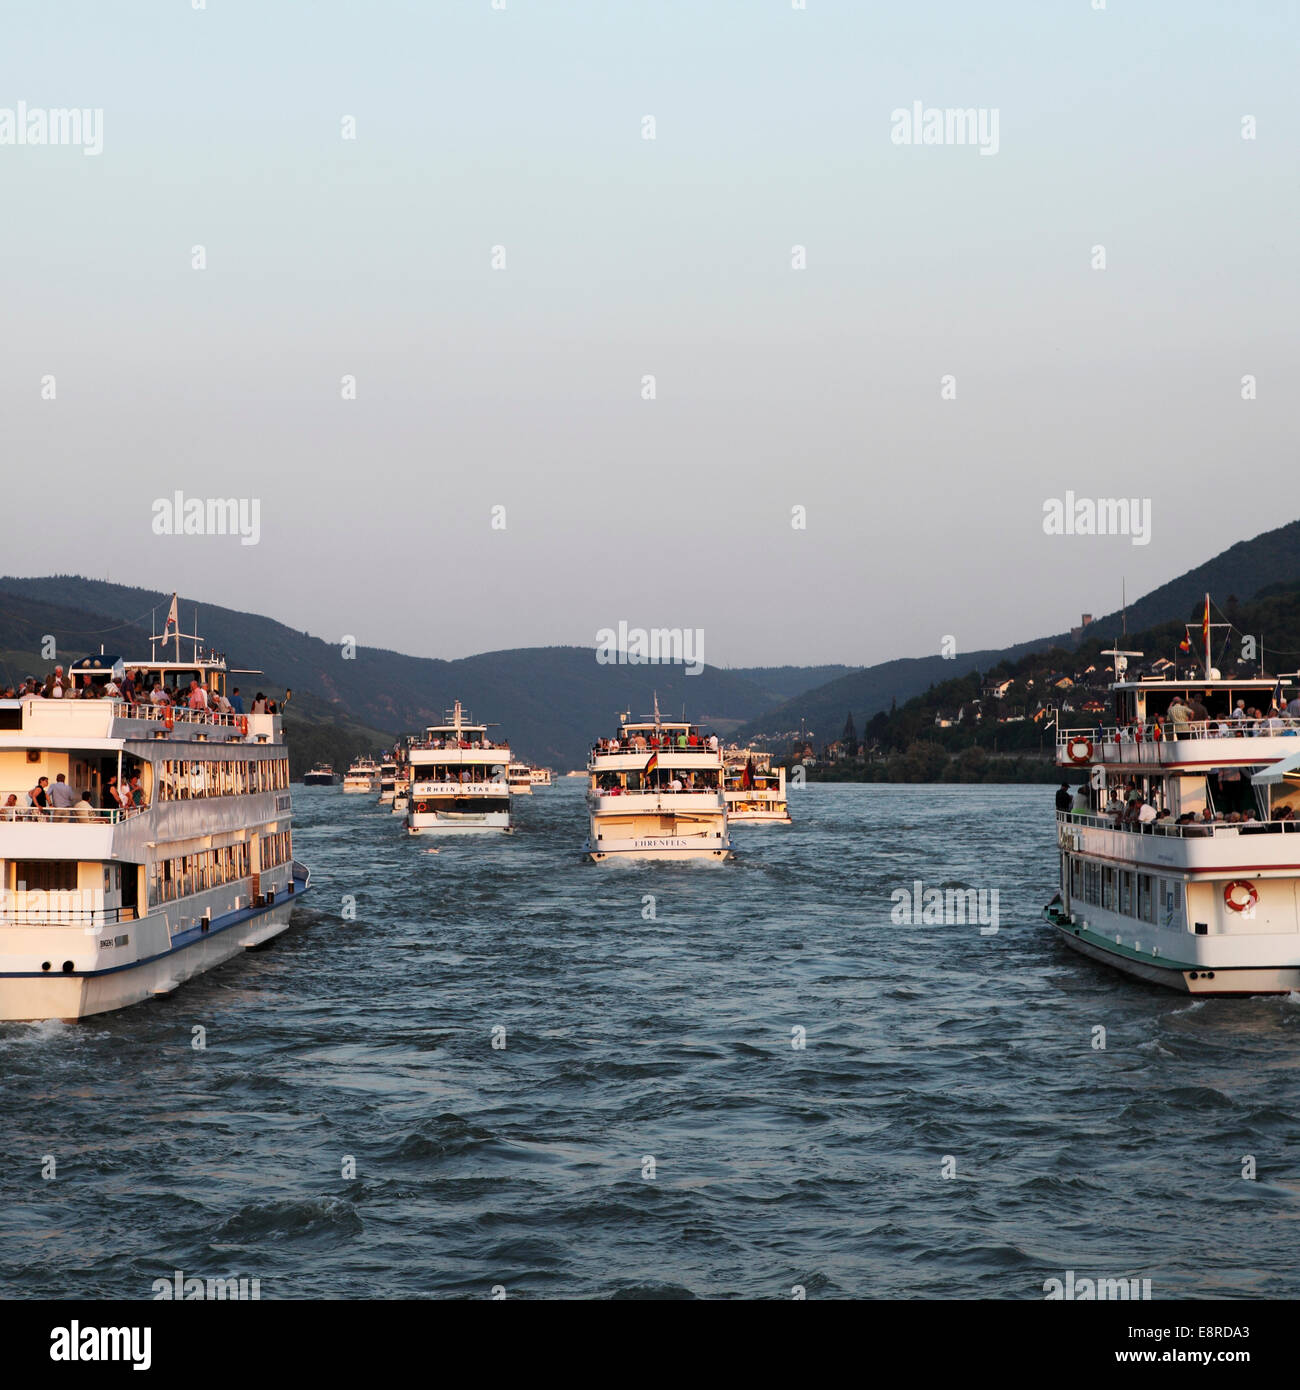 Ships cruising on the River Rhine in Germany. Stock Photo